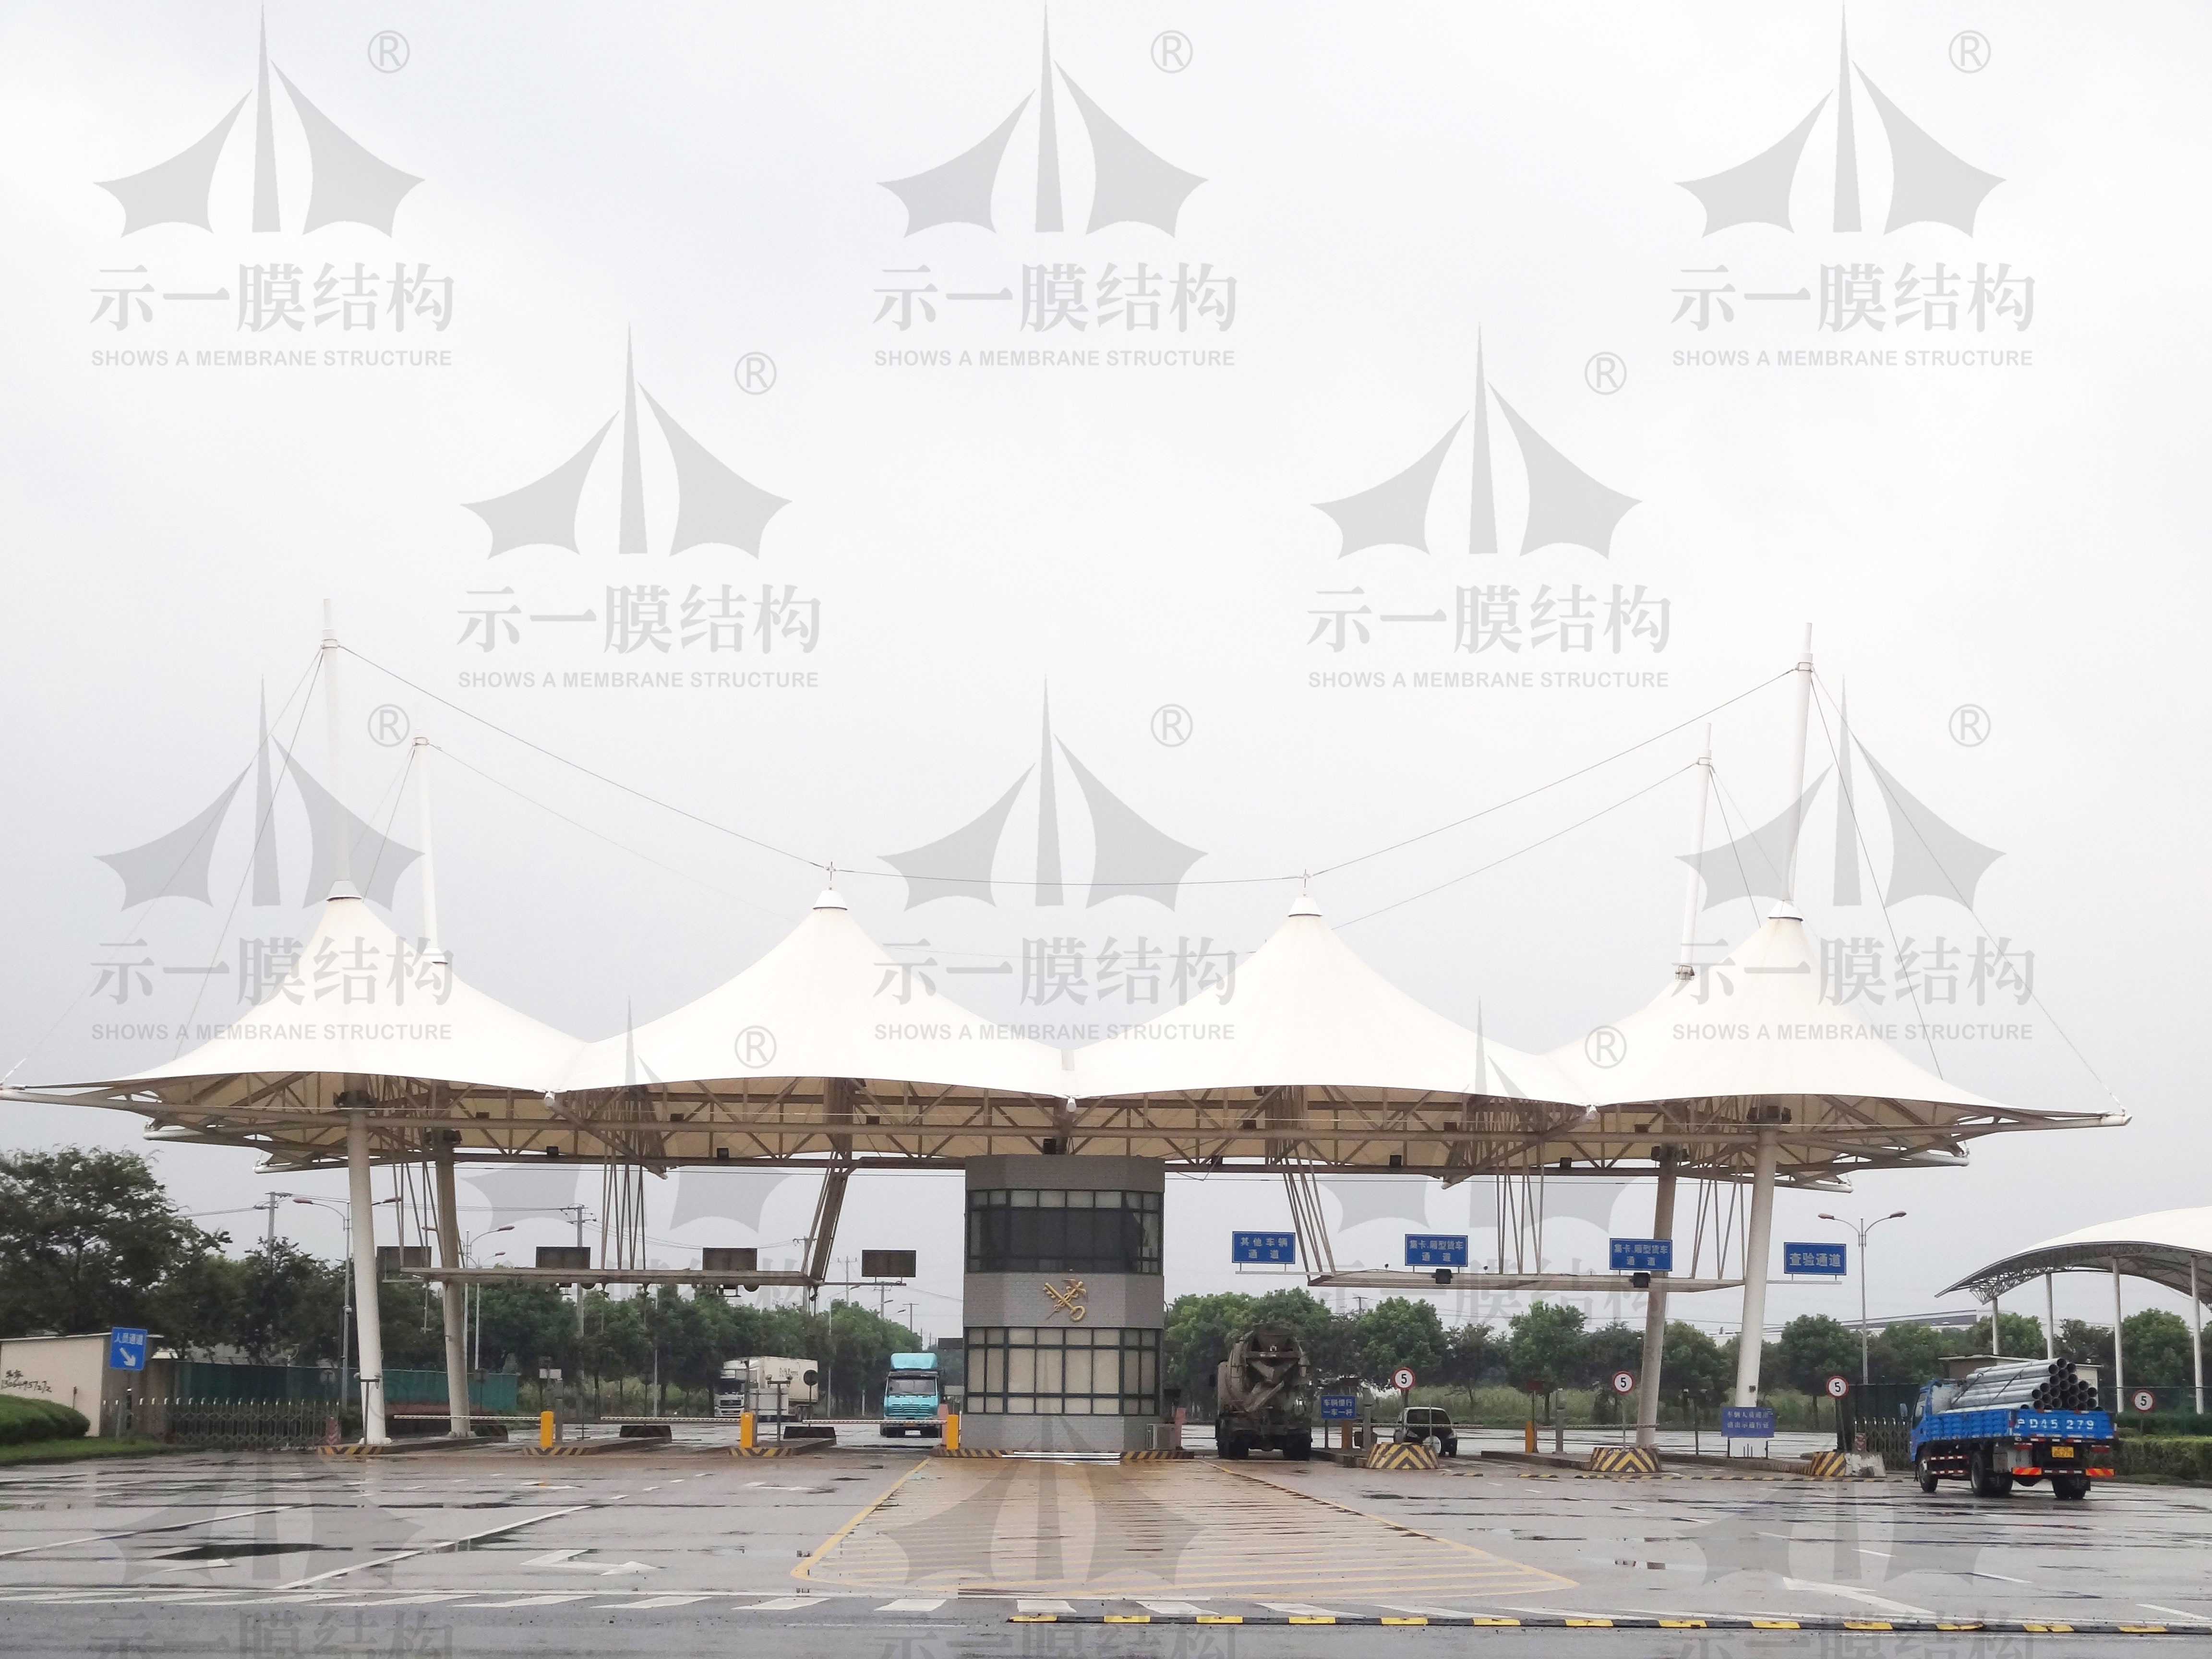 Membrane structure sunshade in Songjiang Export Processing Zone